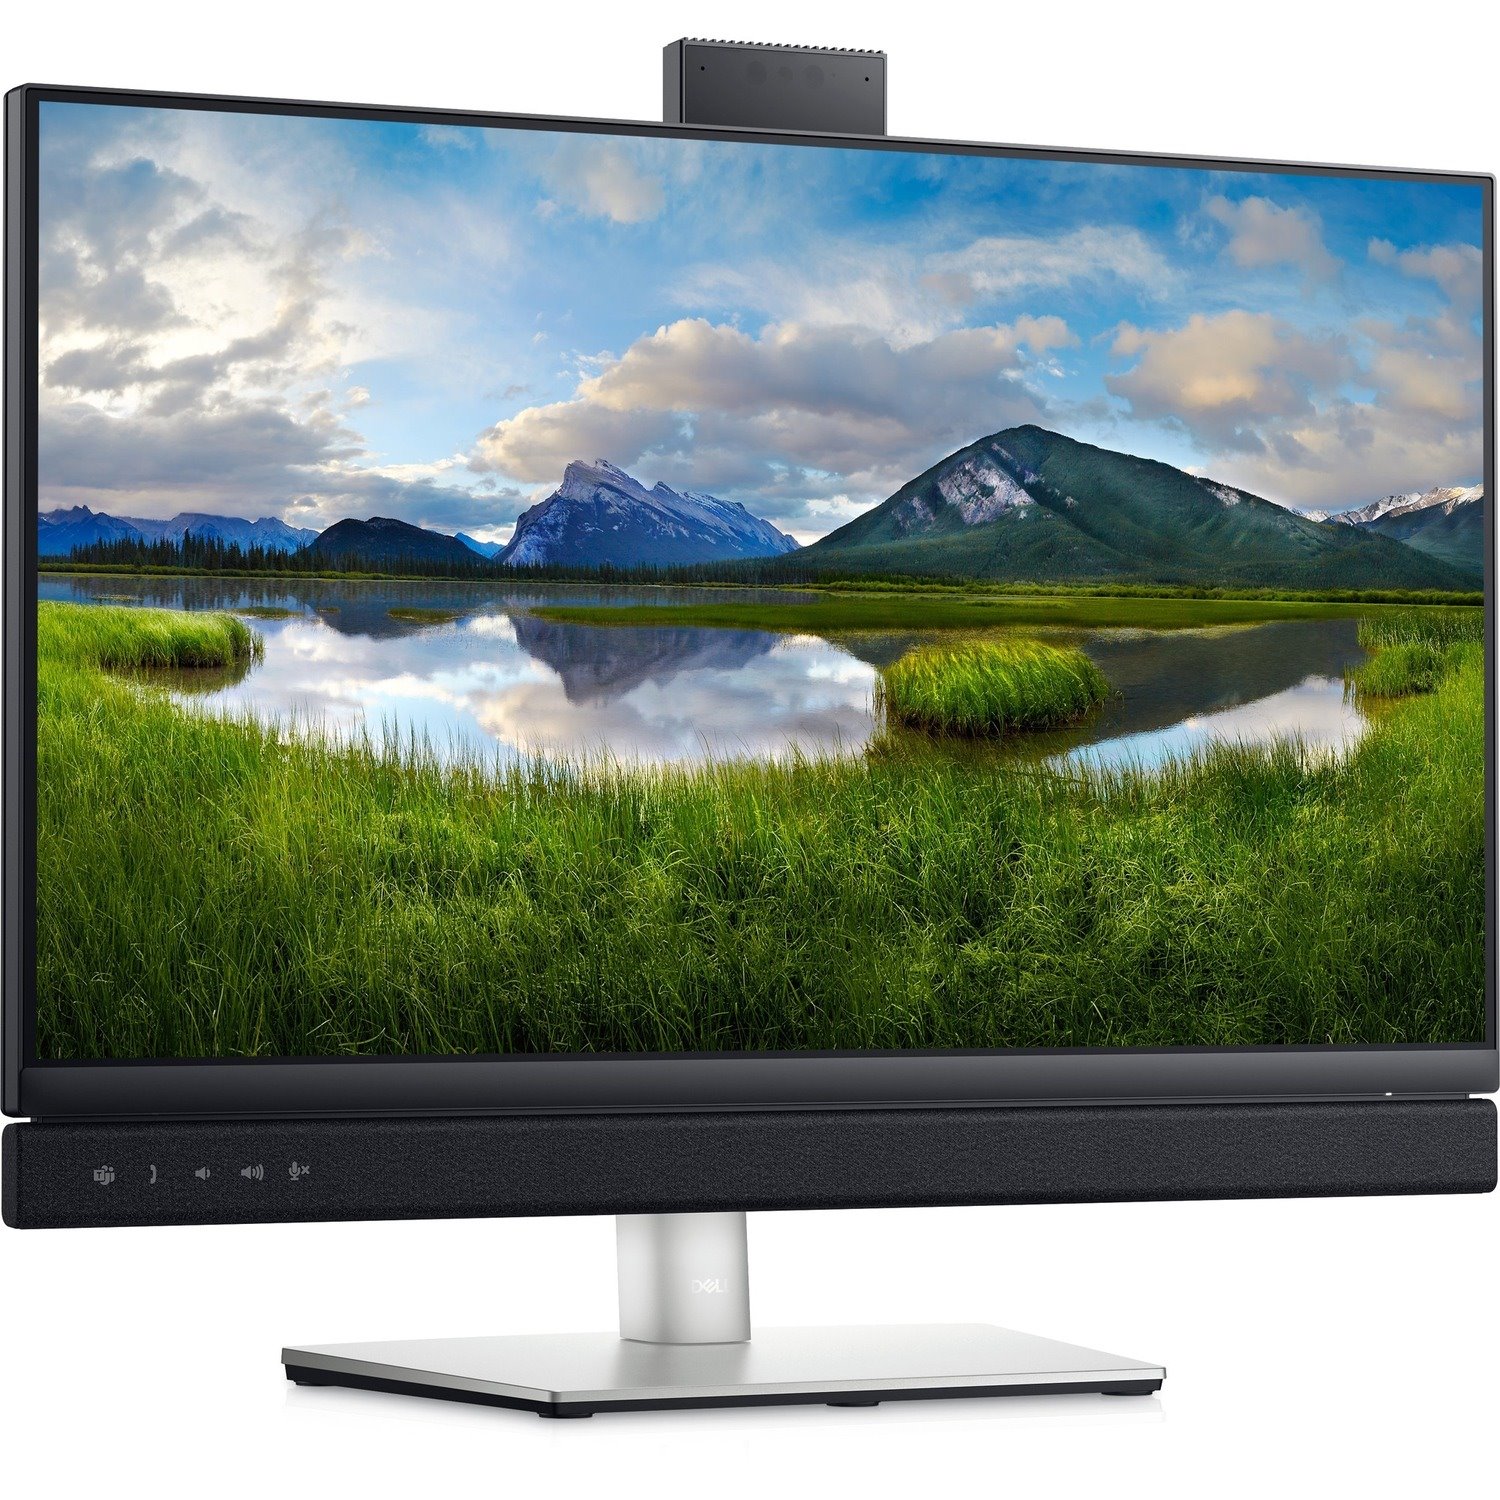 Dell C2422HE 60.5 cm (23.8") LED LCD Monitor